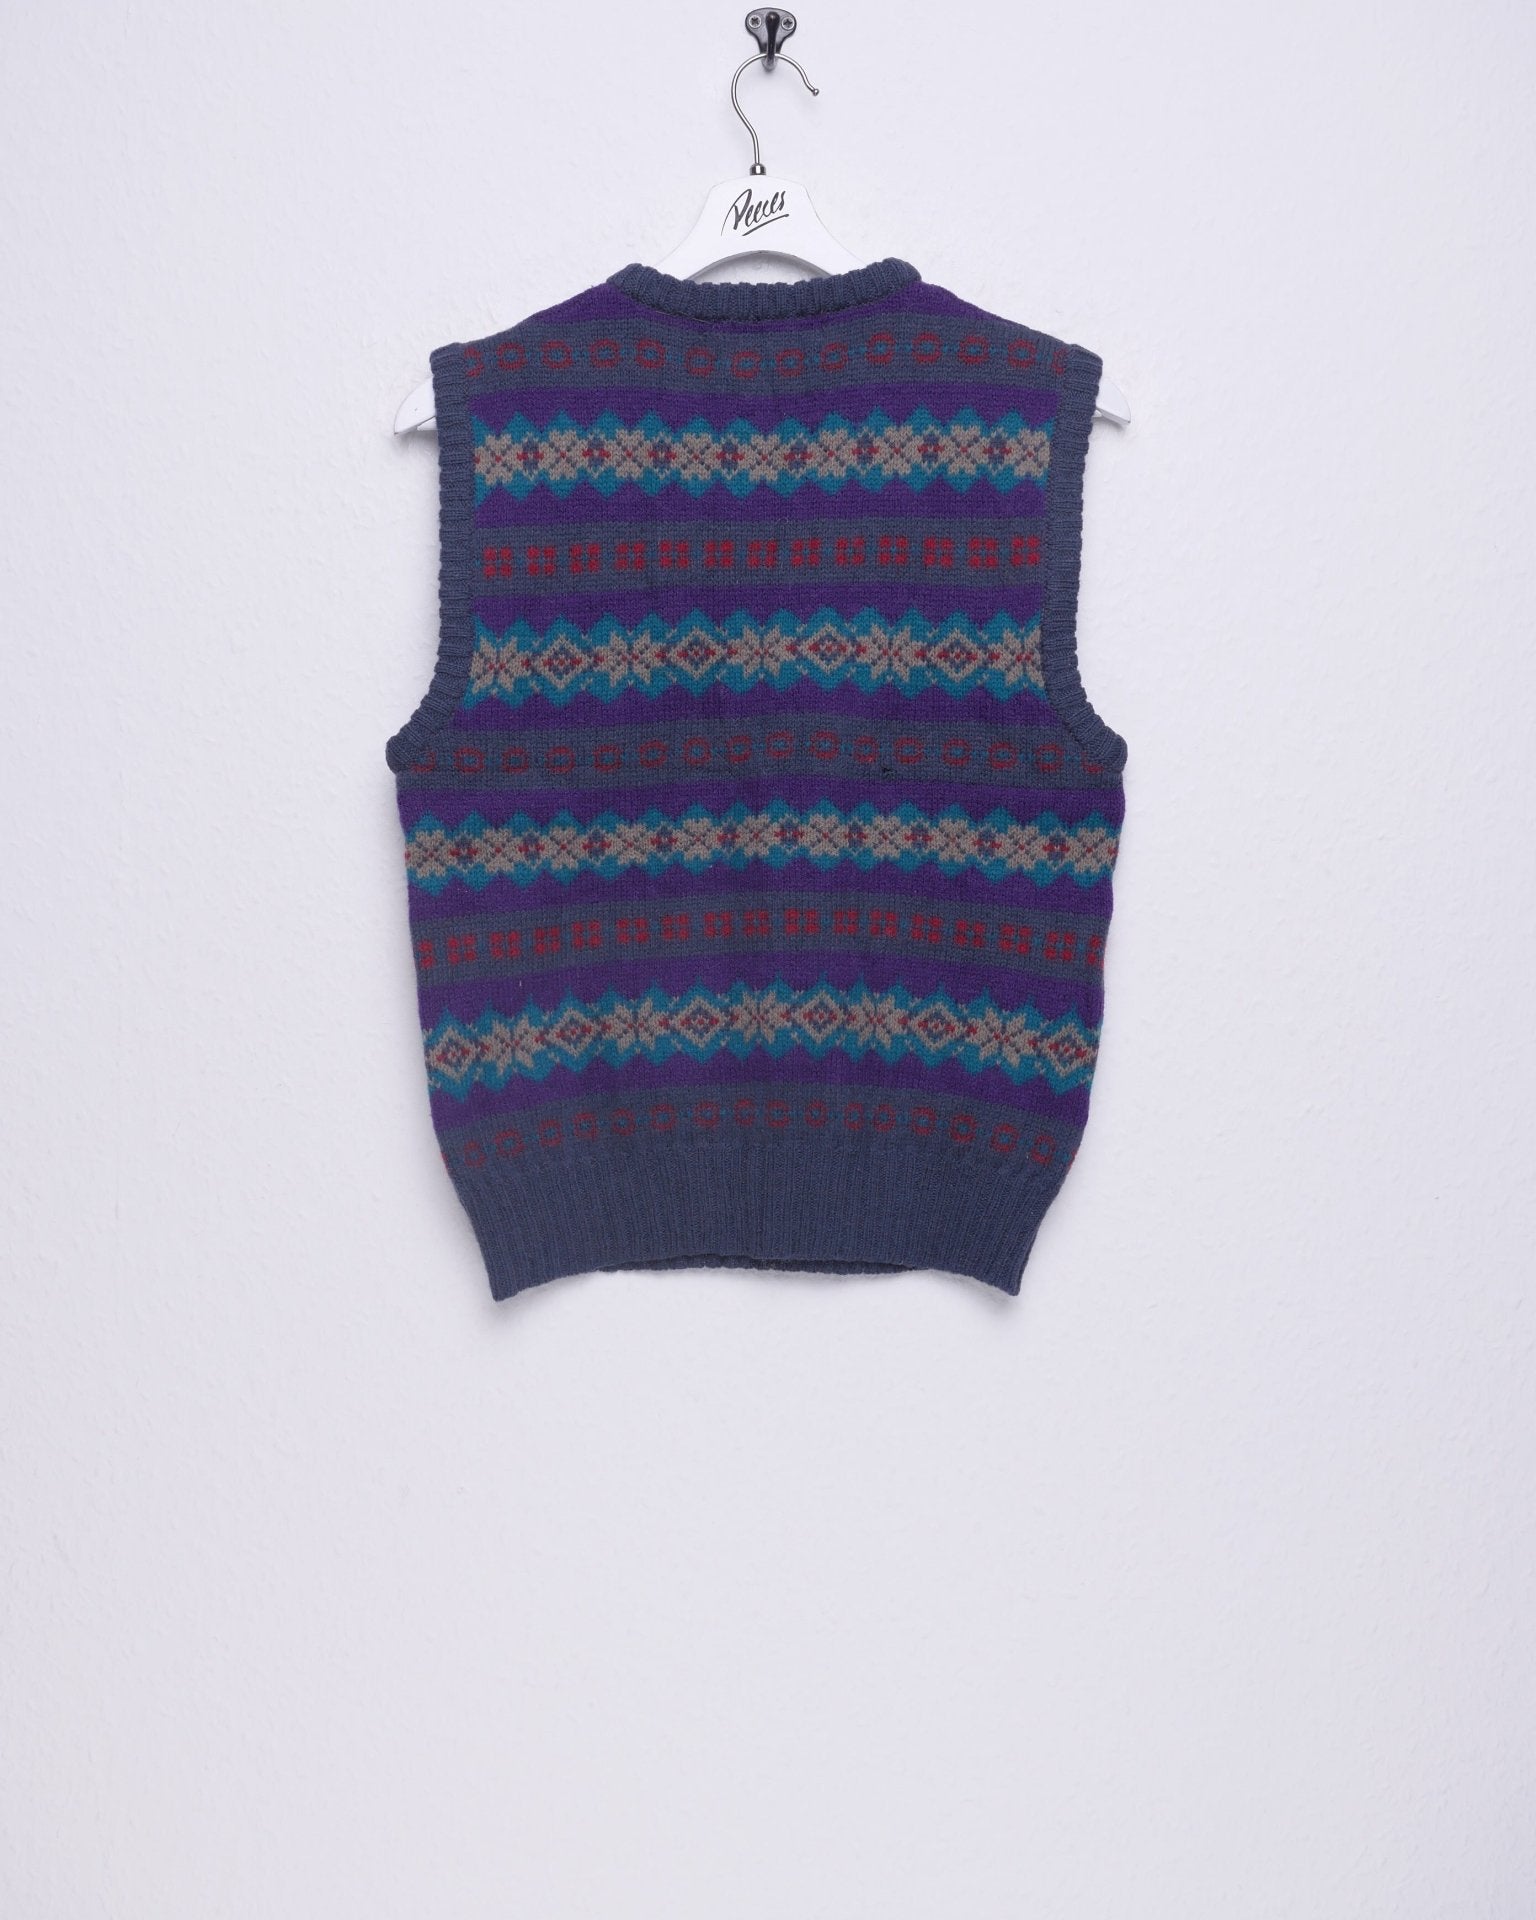 knitted colorful sleeveless wool Sweater - Peeces